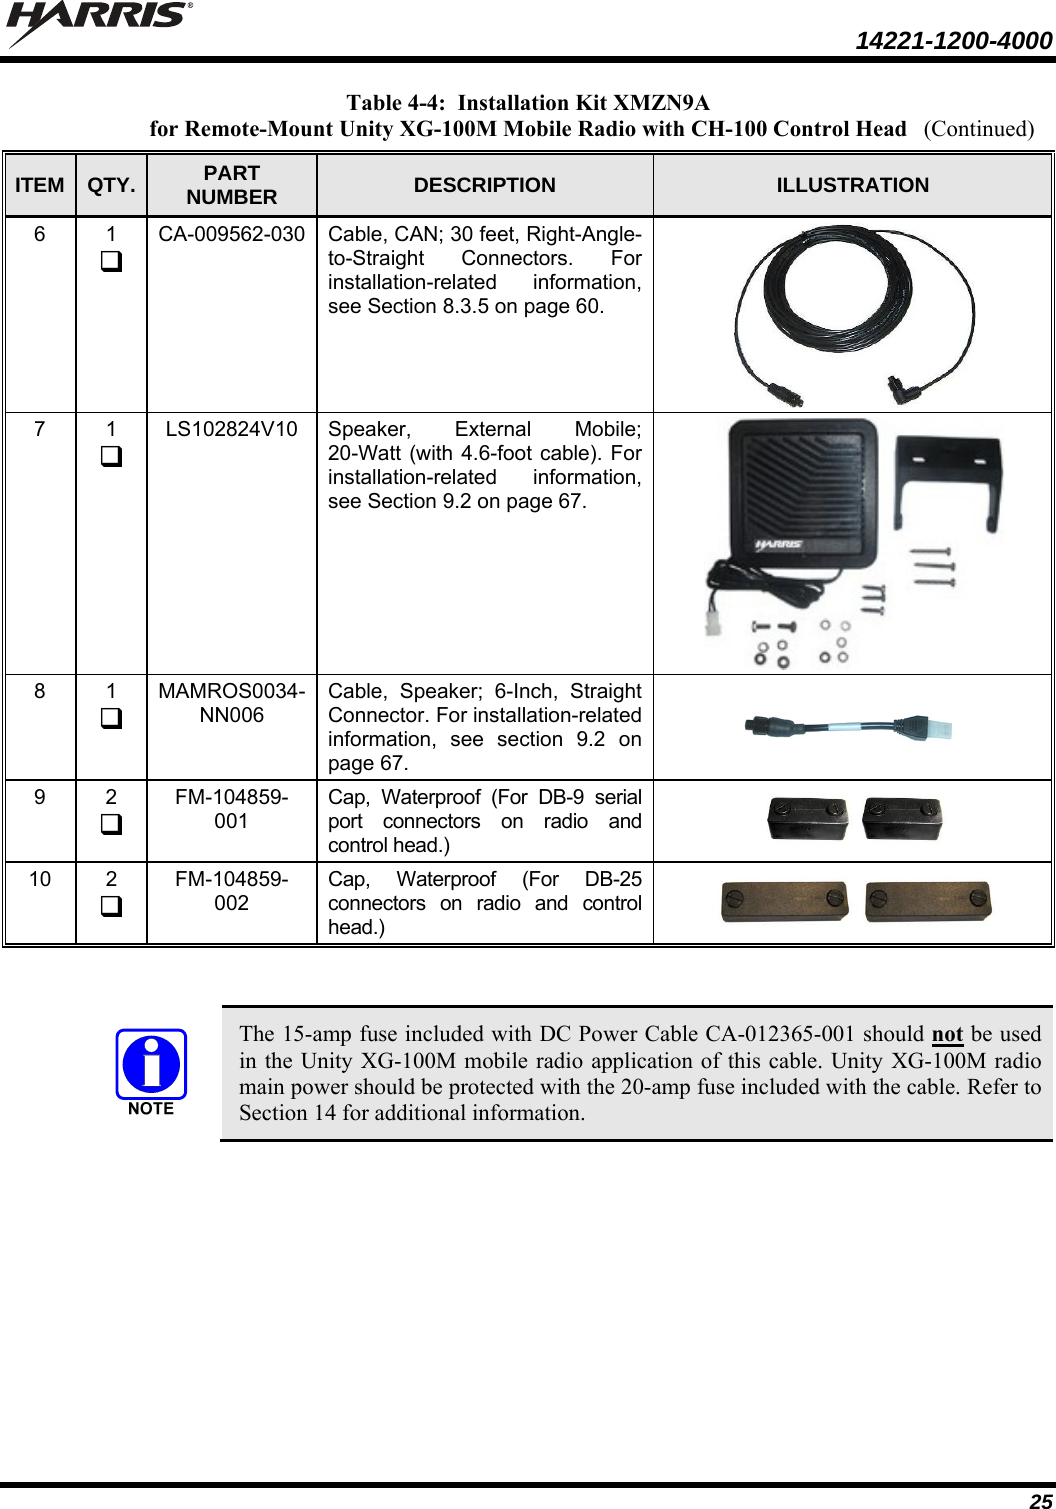  14221-1200-4000  25 Table 4-4:  Installation Kit XMZN9A for Remote-Mount Unity XG-100M Mobile Radio with CH-100 Control Head ITEM  QTY.  PART NUMBER  DESCRIPTION  ILLUSTRATION 6  1  CA-009562-030  Cable, CAN; 30 feet, Right-Angle-to-Straight Connectors. For installation-related information, see Section 8.3.5 on page 60. 7  1  LS102824V10  Speaker, External Mobile; 20-Watt (with 4.6-foot cable). For installation-related information, see Section 9.2 on page 67. 8  1  MAMROS0034-NN006 Cable, Speaker; 6-Inch, Straight Connector. For installation-related information, see section 9.2 on page 67.   9  2  FM-104859-001 Cap, Waterproof (For DB-9 serial port connectors on radio and control head.)   10  2  FM-104859-002 Cap, Waterproof (For DB-25 connectors on radio and control head.)        The 15-amp fuse included with DC Power Cable CA-012365-001 should not be used in the Unity XG-100M mobile radio application of this cable. Unity XG-100M radio main power should be protected with the 20-amp fuse included with the cable. Refer to Section 14 for additional information.   (Continued)